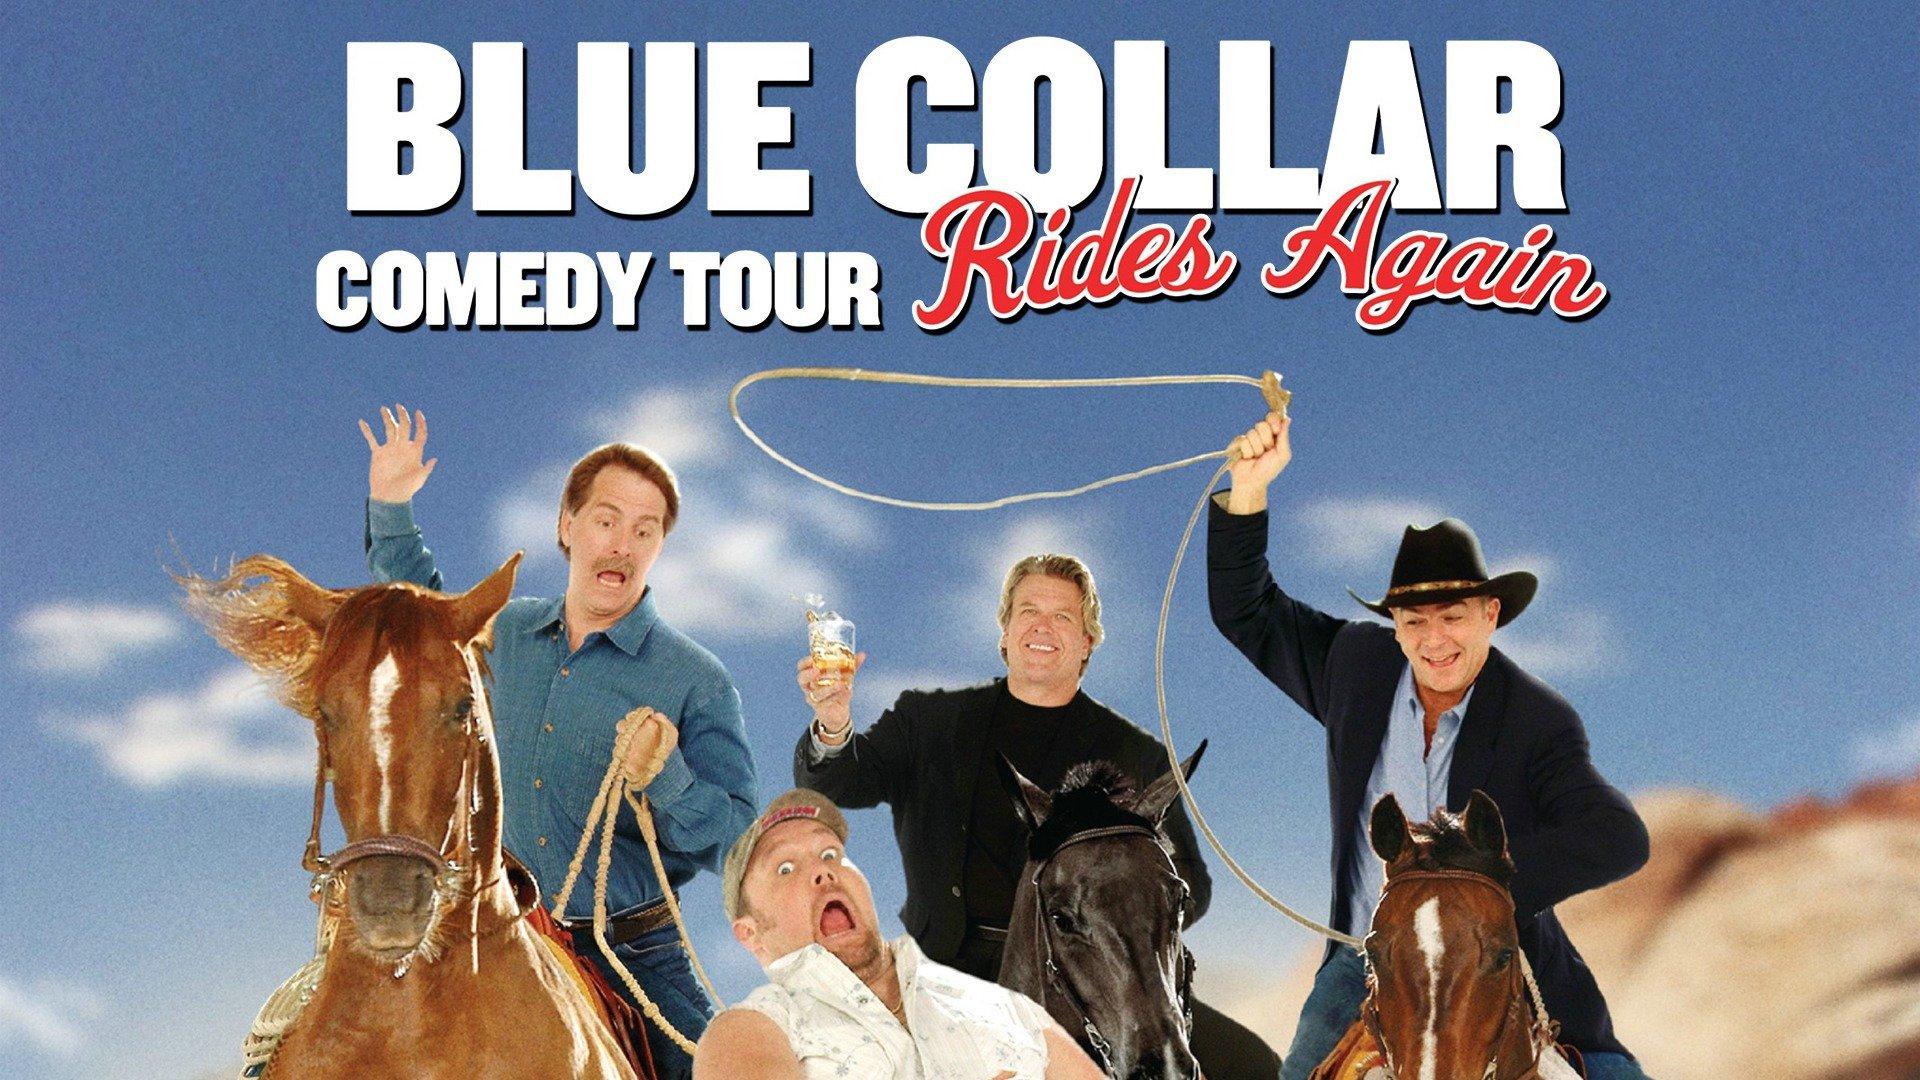 watch blue collar comedy tour rides again online free